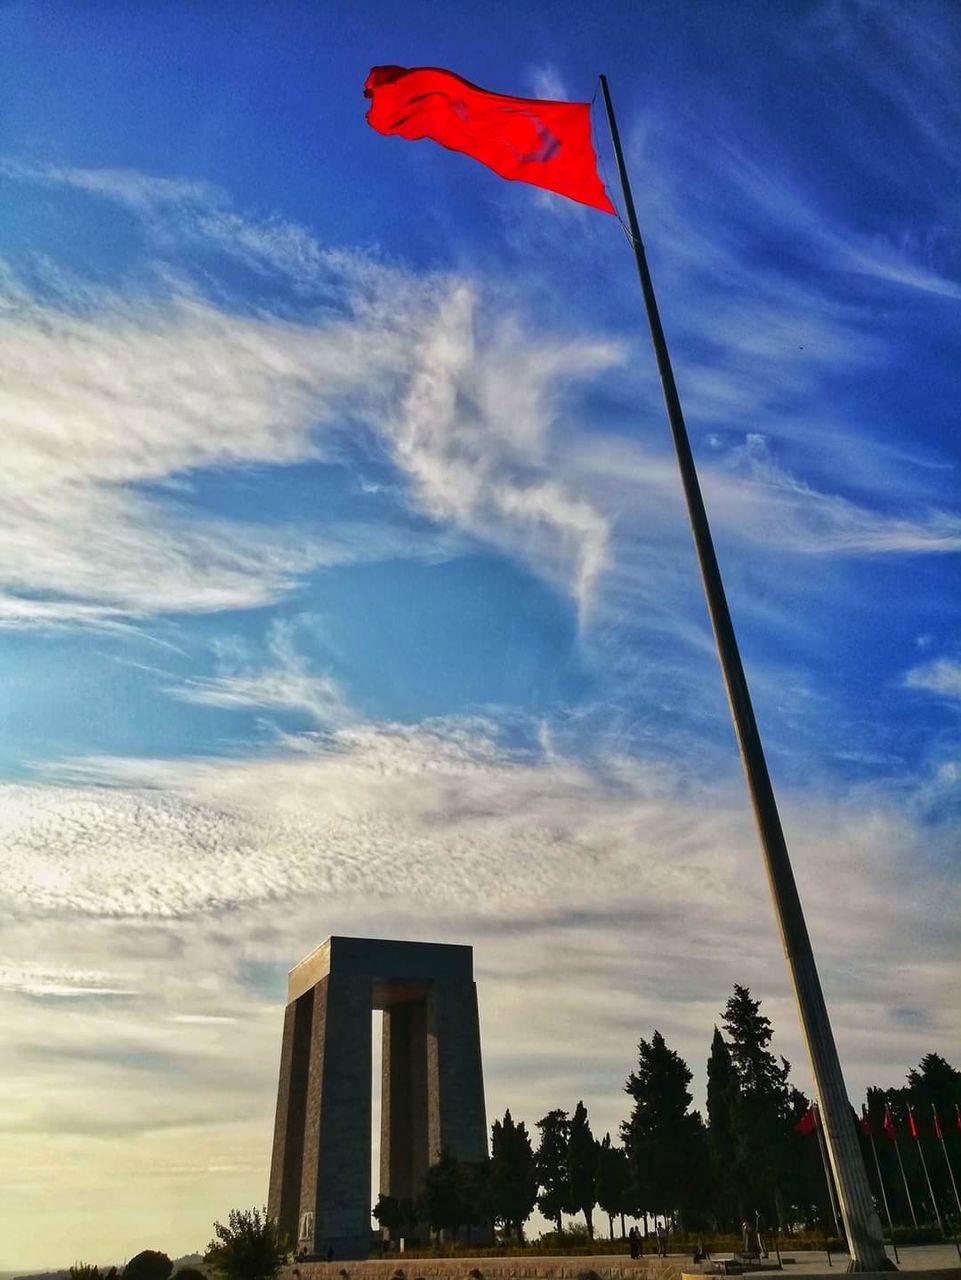 flag, sky, patriotism, cloud, architecture, nature, built structure, low angle view, building exterior, no people, environment, red, outdoors, day, wind, city, blue, tree, plant, travel destinations